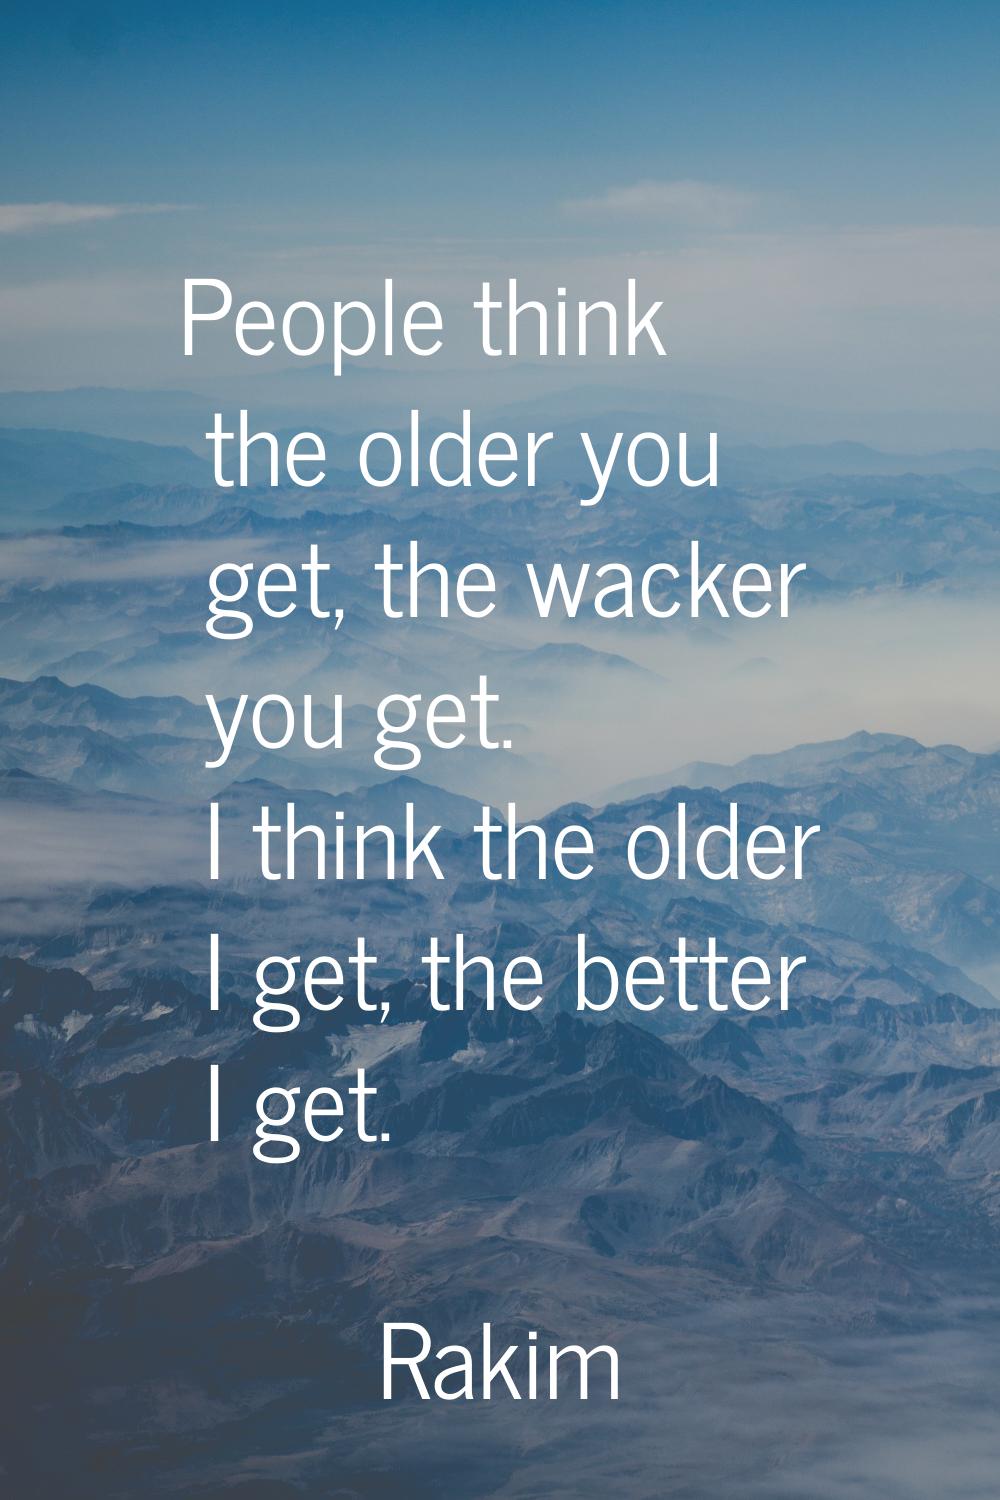 People think the older you get, the wacker you get. I think the older I get, the better I get.